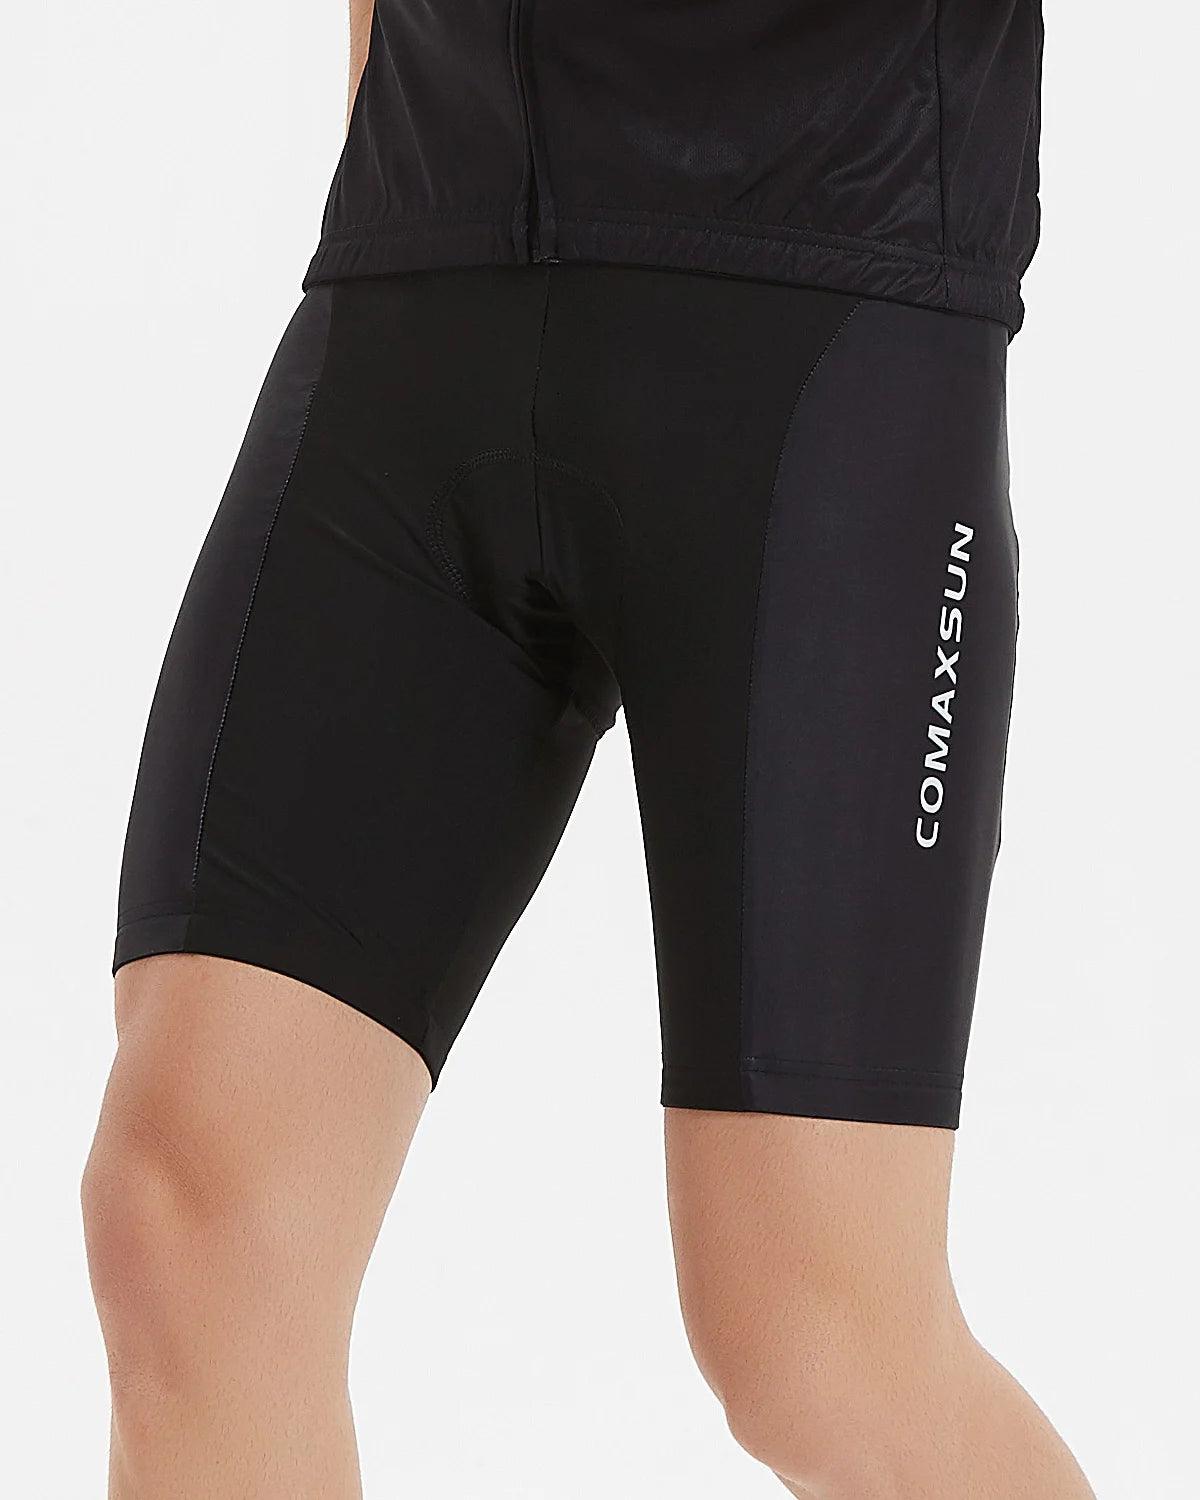 Men's Cycling Shorts 3D Padded Bike/Bicycle Outdoor Sports Tight S-3XL 10 Style